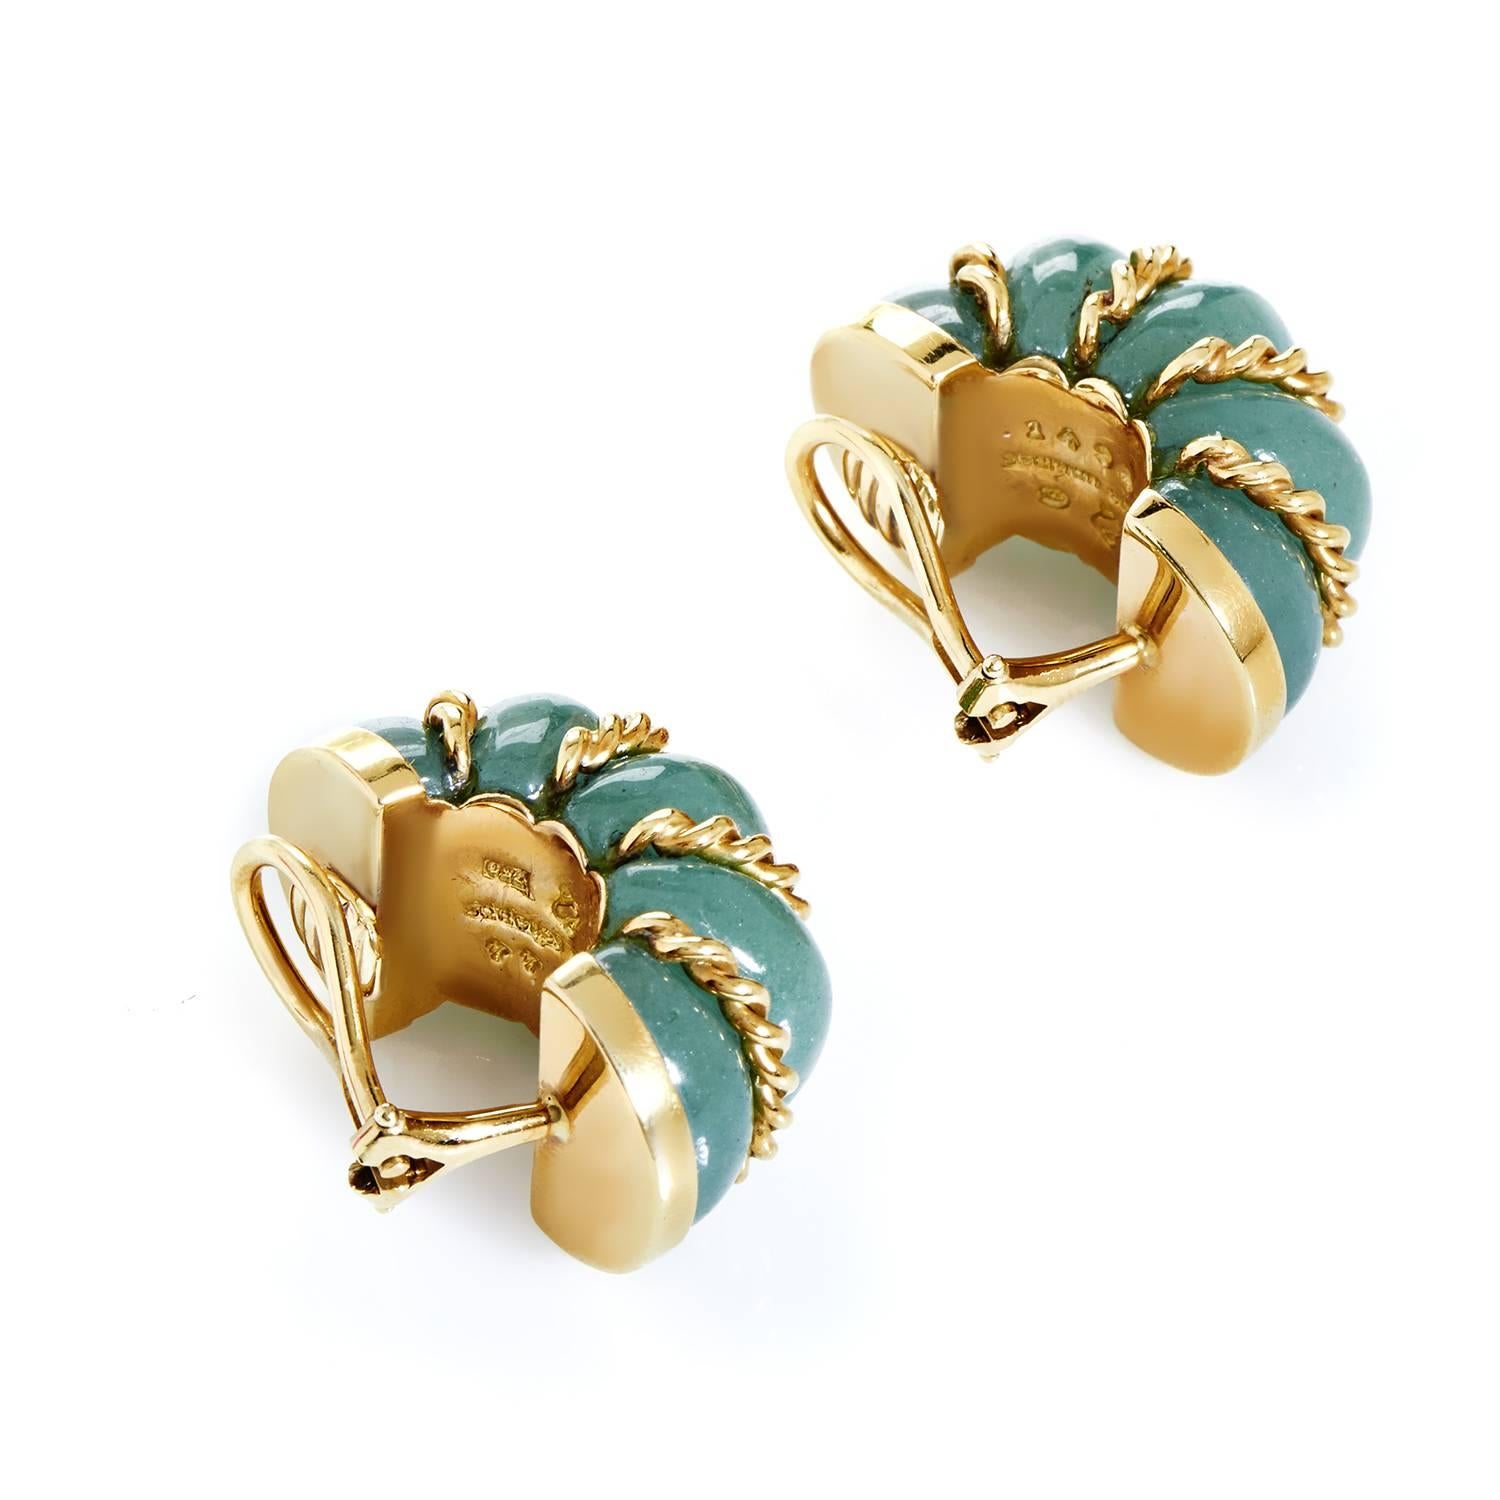 The marvelous nuance of the gorgeous green aventurine stones combines tastefully with the luxurious warm shimmer of intriguingly designed 18K yellow gold in these nifty earrings from Seaman Schepps which offer a classy look.
Included Items: